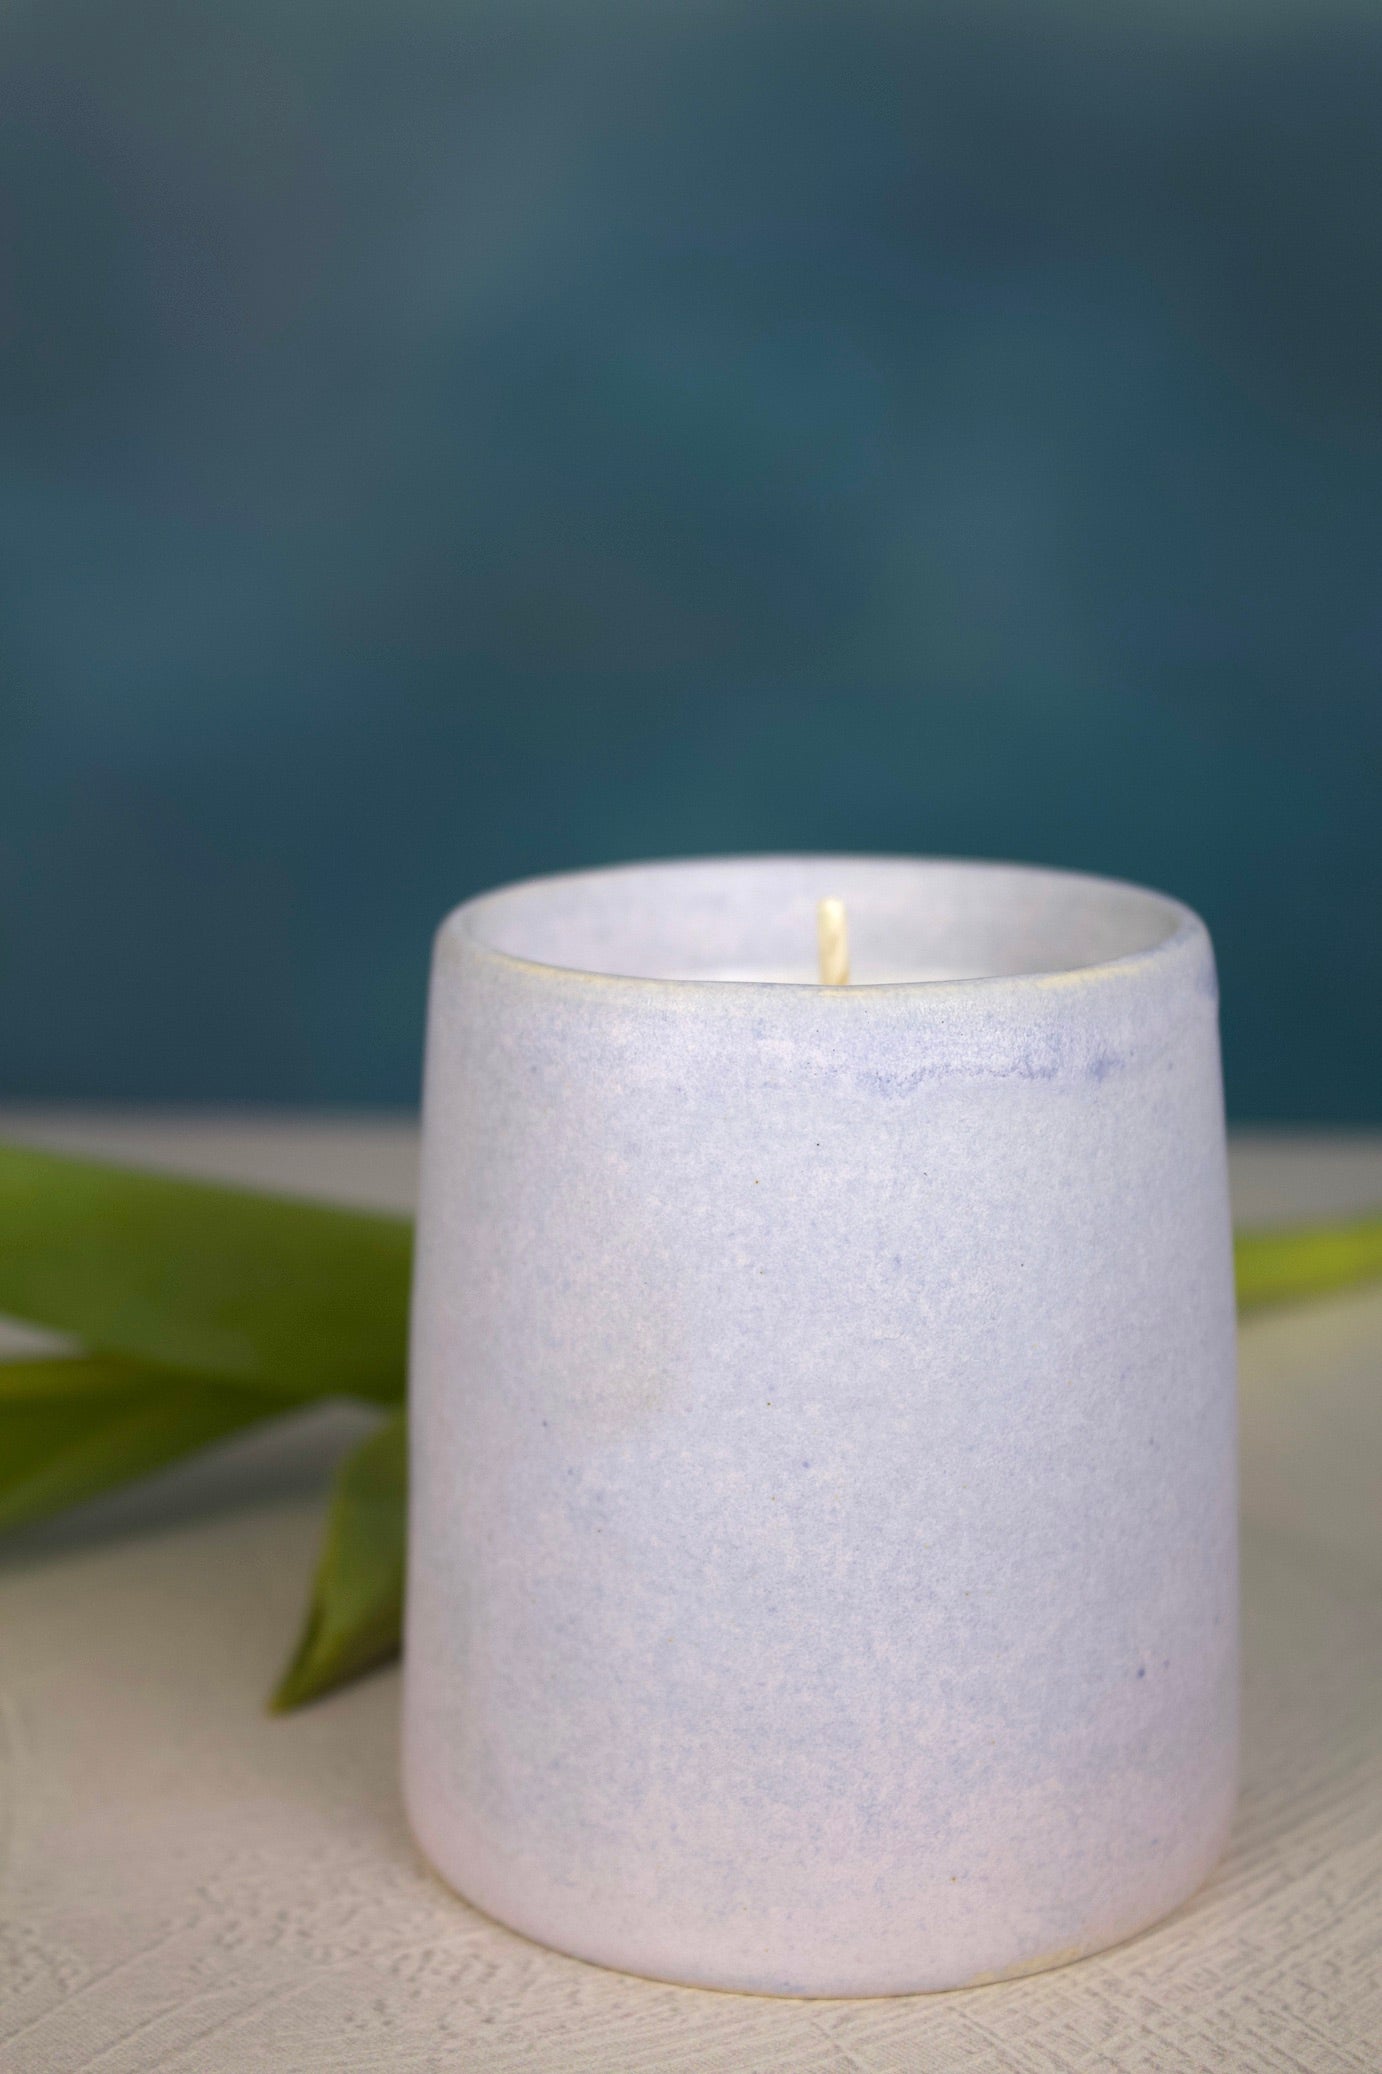 Fragrance Free Candle